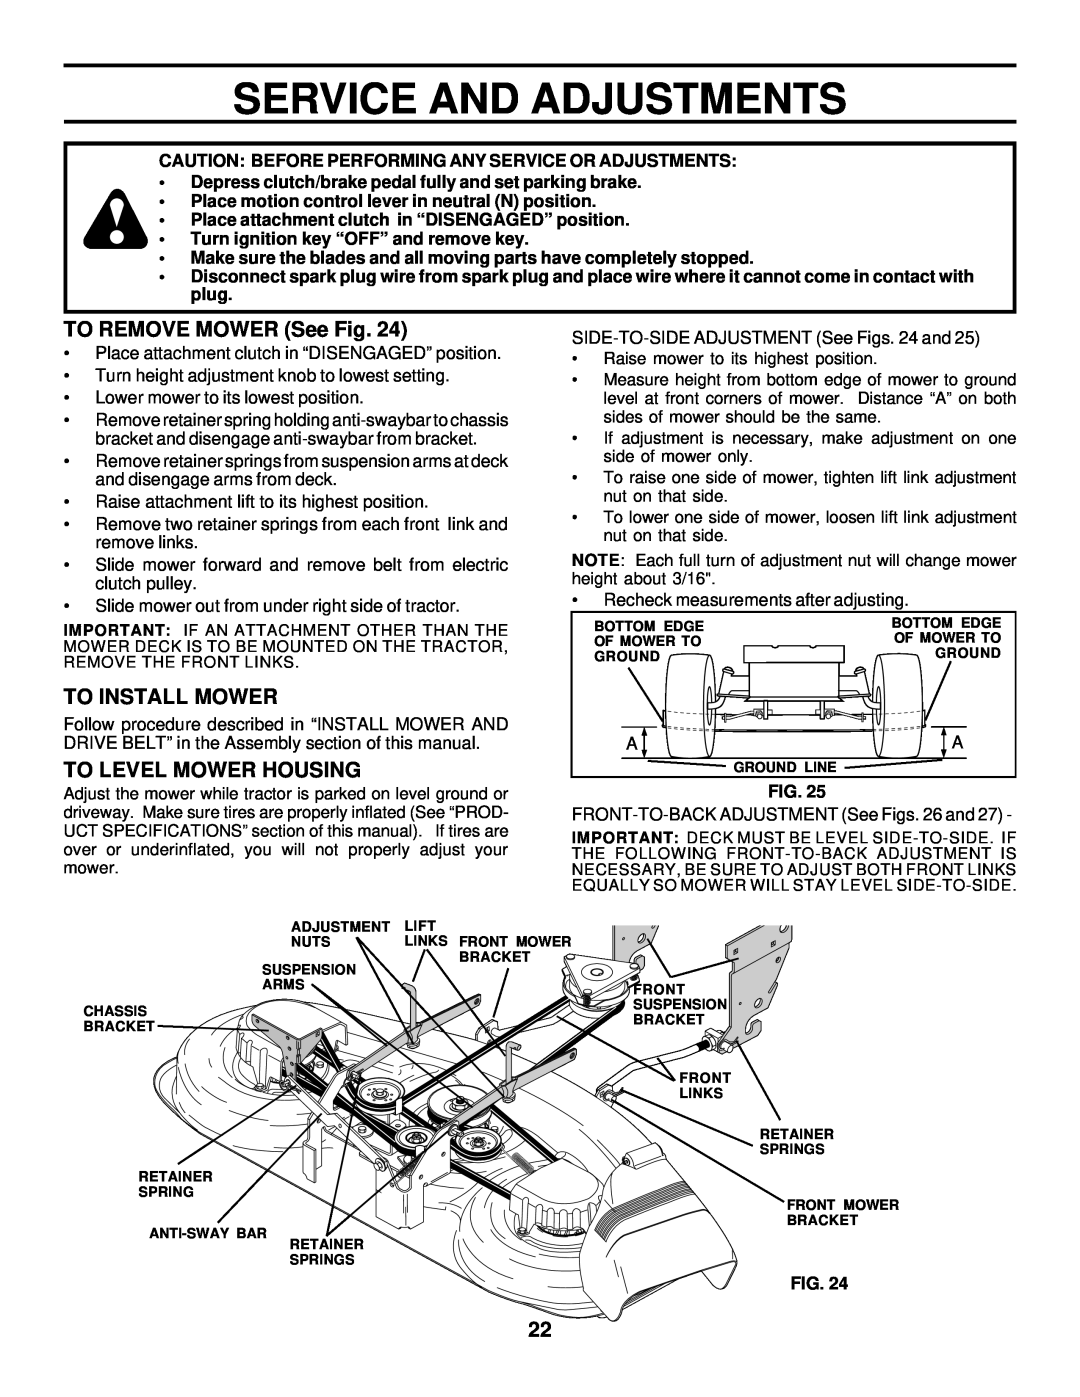 Husqvarna GTH225 owner manual Service And Adjustments, TO REMOVE MOWER See Fig, To Install Mower, To Level Mower Housing 